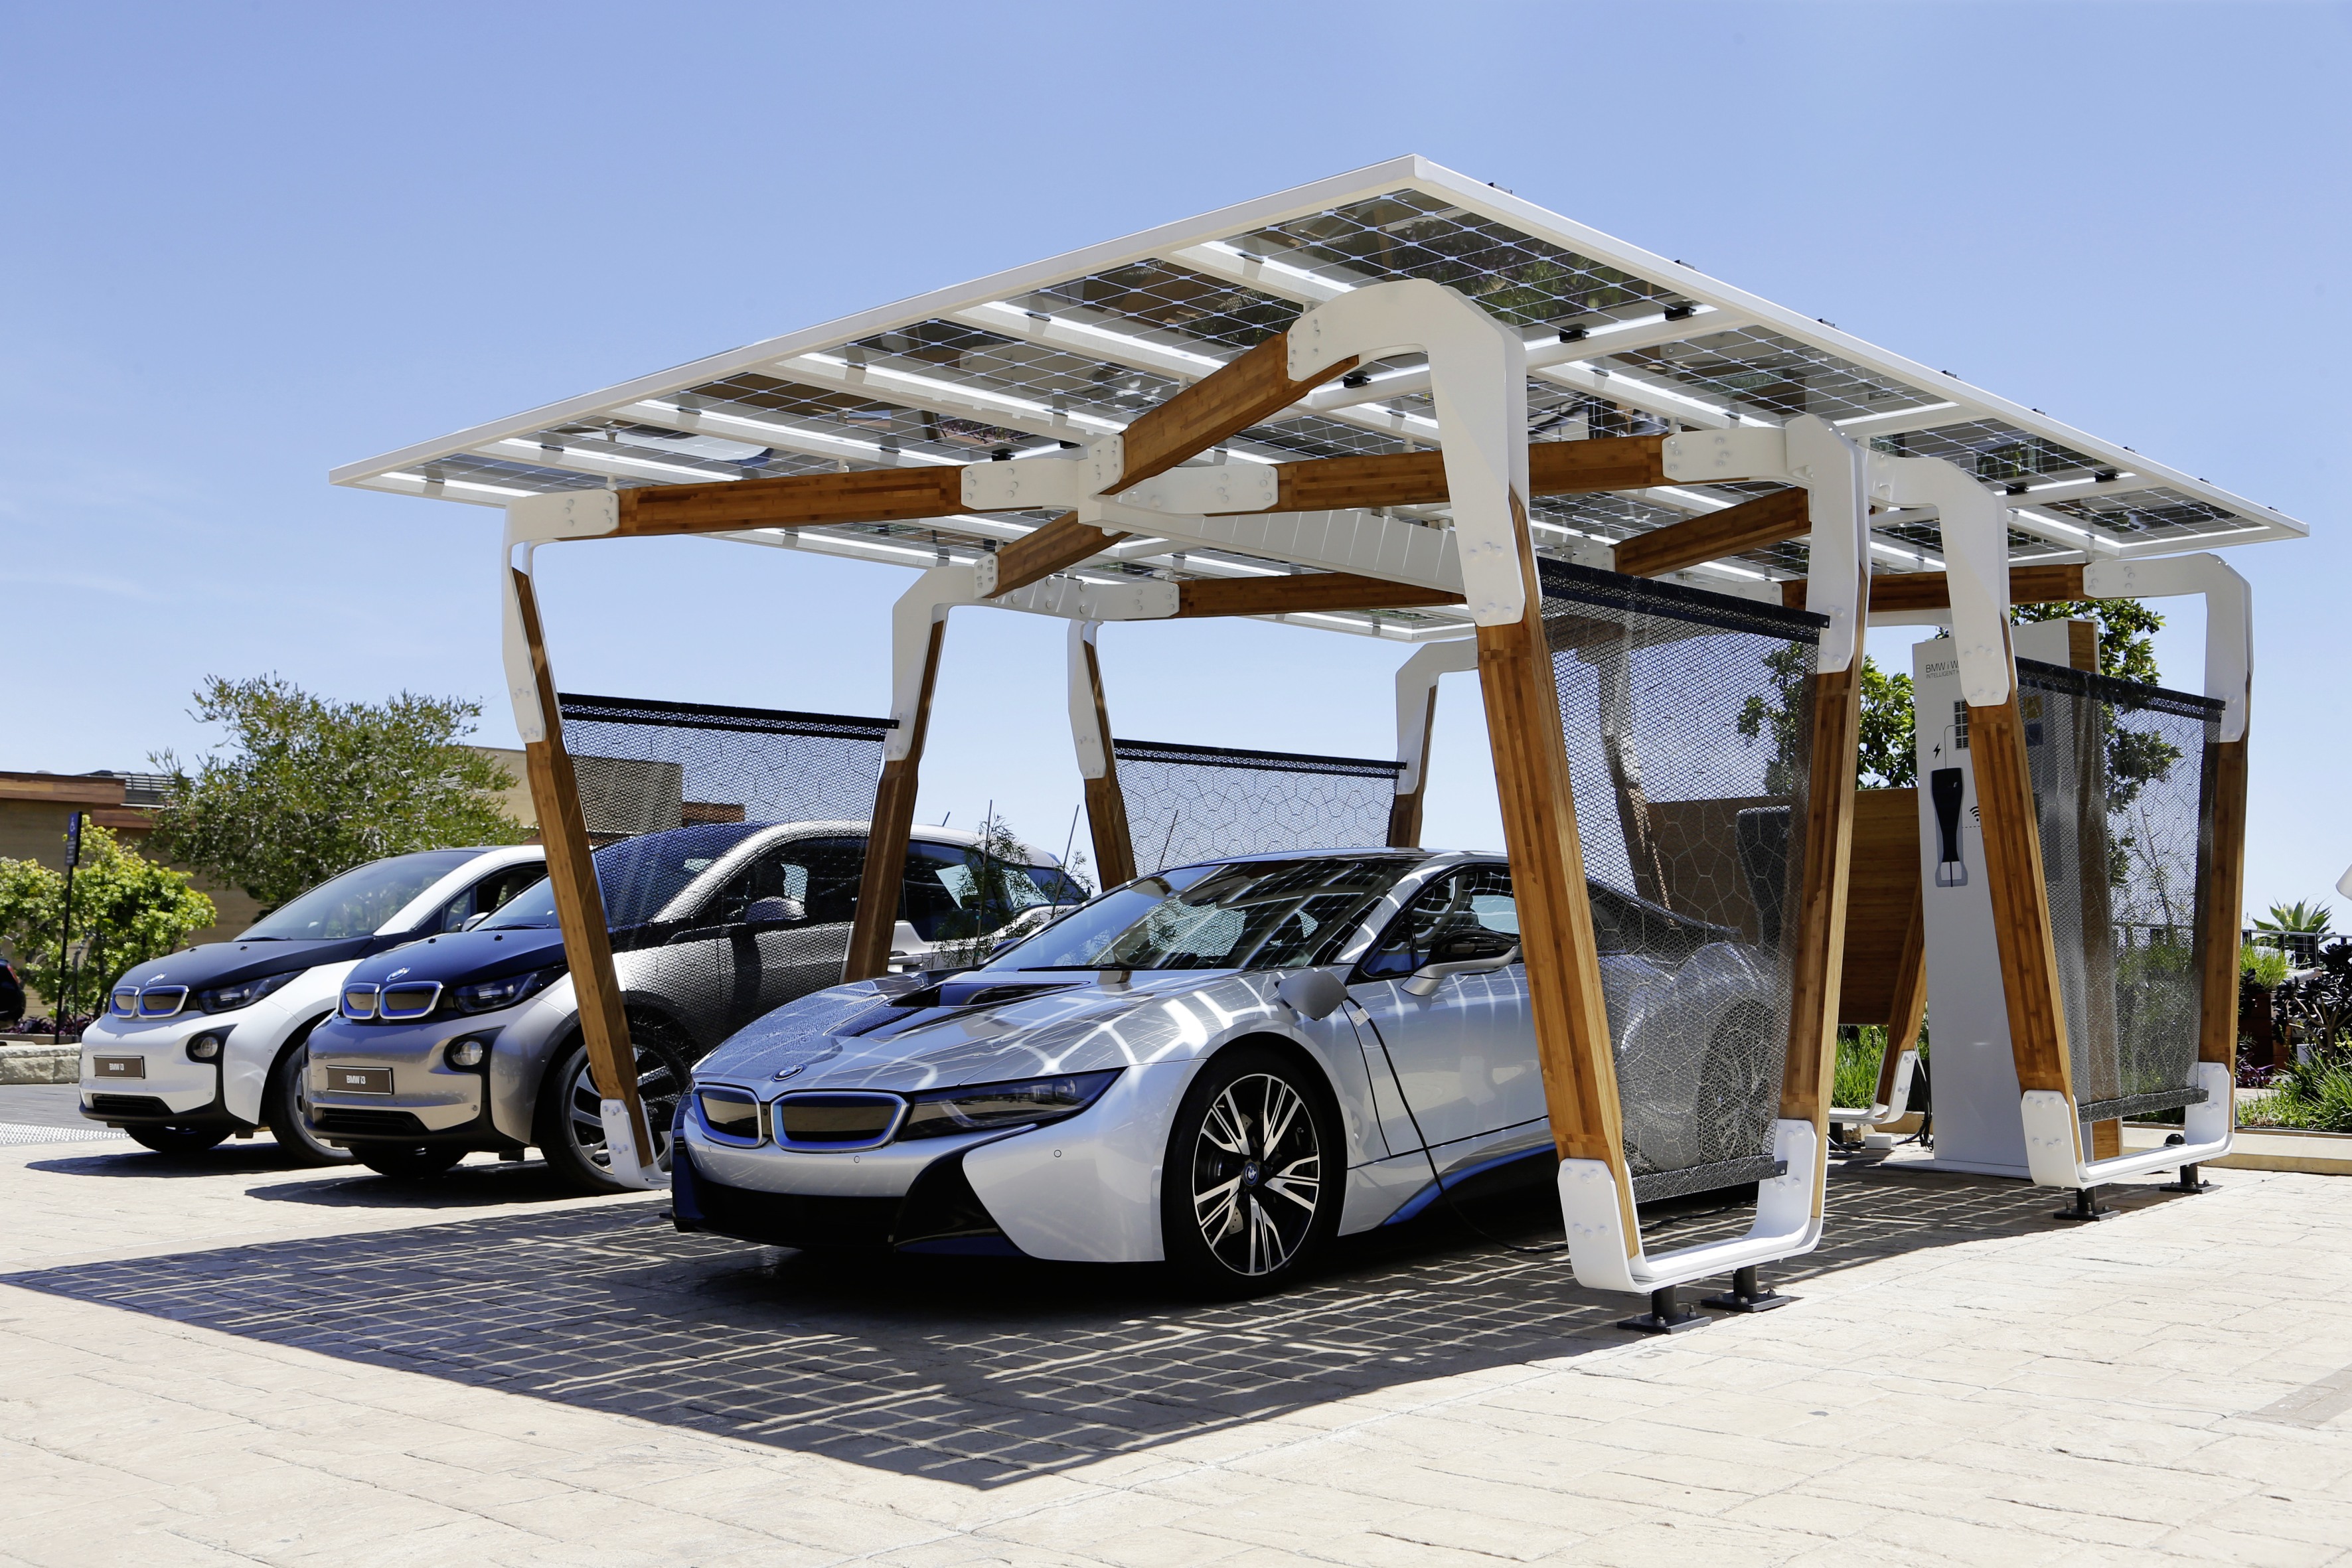 BMW's Electric Brand Will Lower CO2, Cost A Lot, And Pay Off Big Long-Term